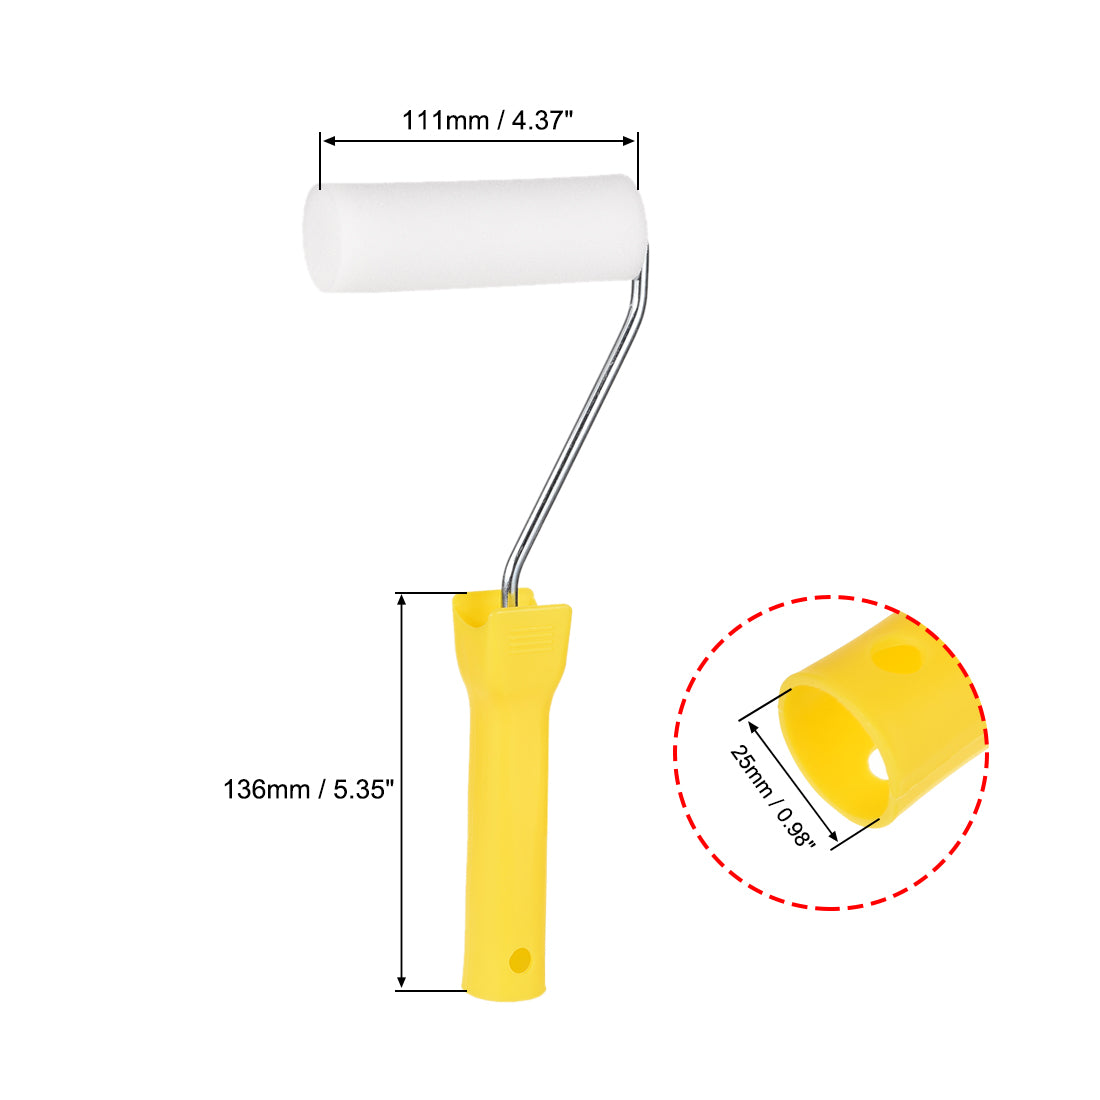 uxcell Uxcell Sponge Paint Roller Brush 4.5 Inch 111mm for Household Wall Painting Treatment with Plastic Handle